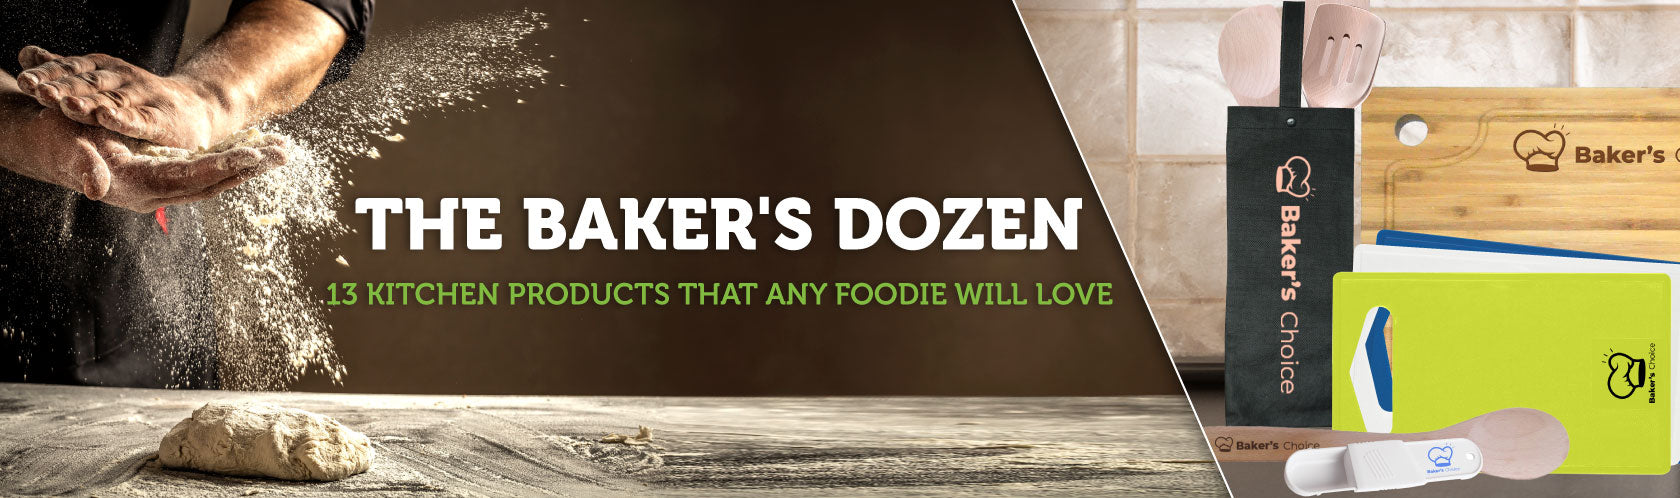 The Baker's Dozen: 13 Kitchen Products that any Foodie will Love